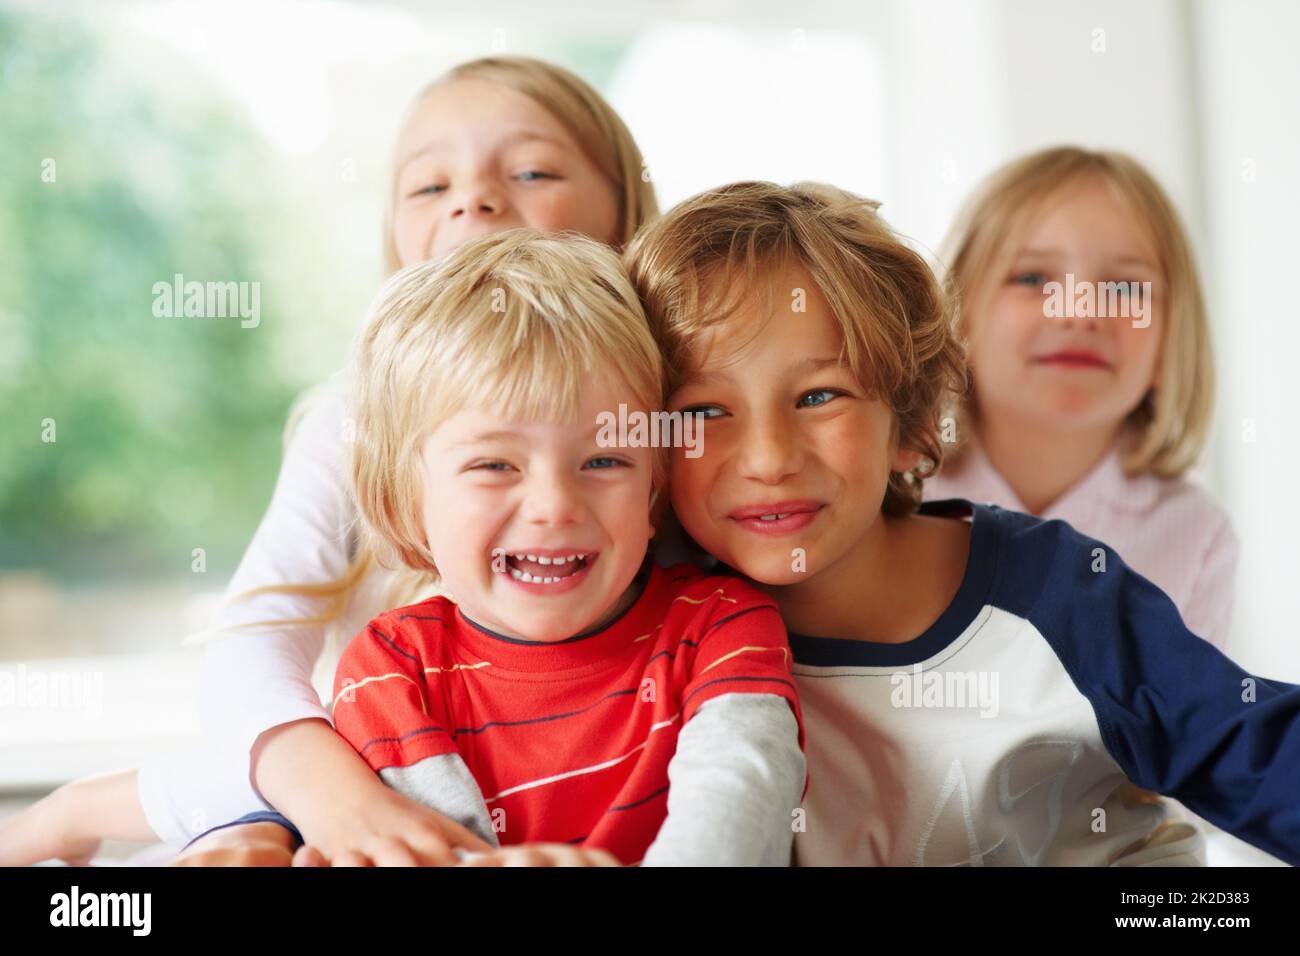 Cheerful little boy with his brother and sisters. Portrait of a cheerful little boy with his brother and sisters. Stock Photo